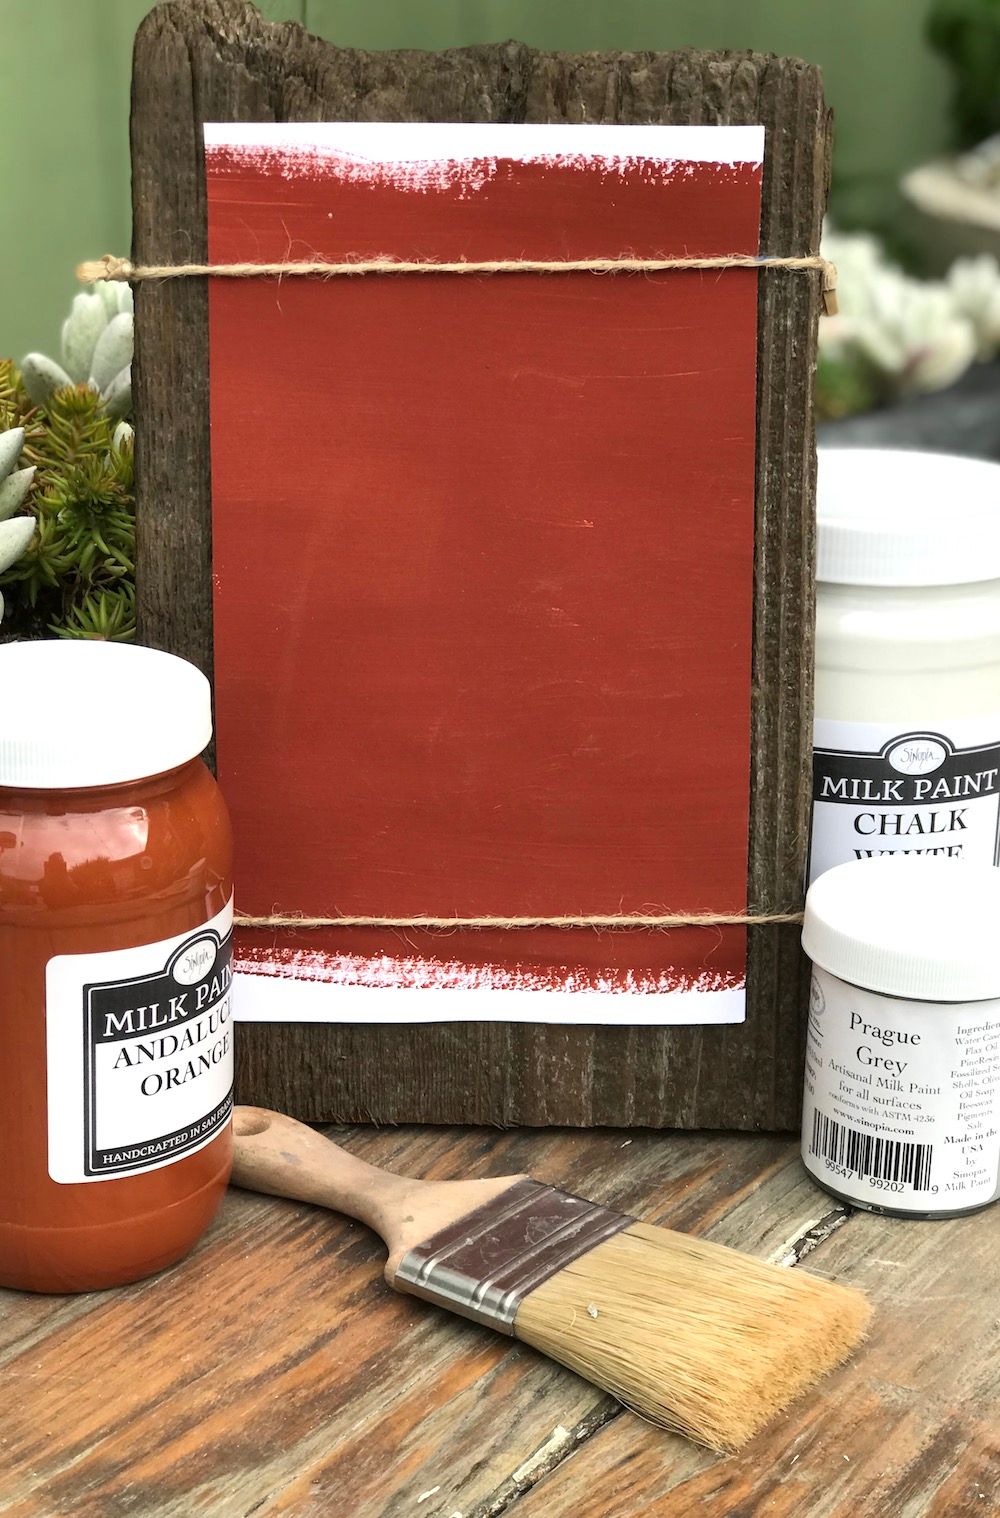 Milk Paint Terra Cotta is available at Natural Art Supplies